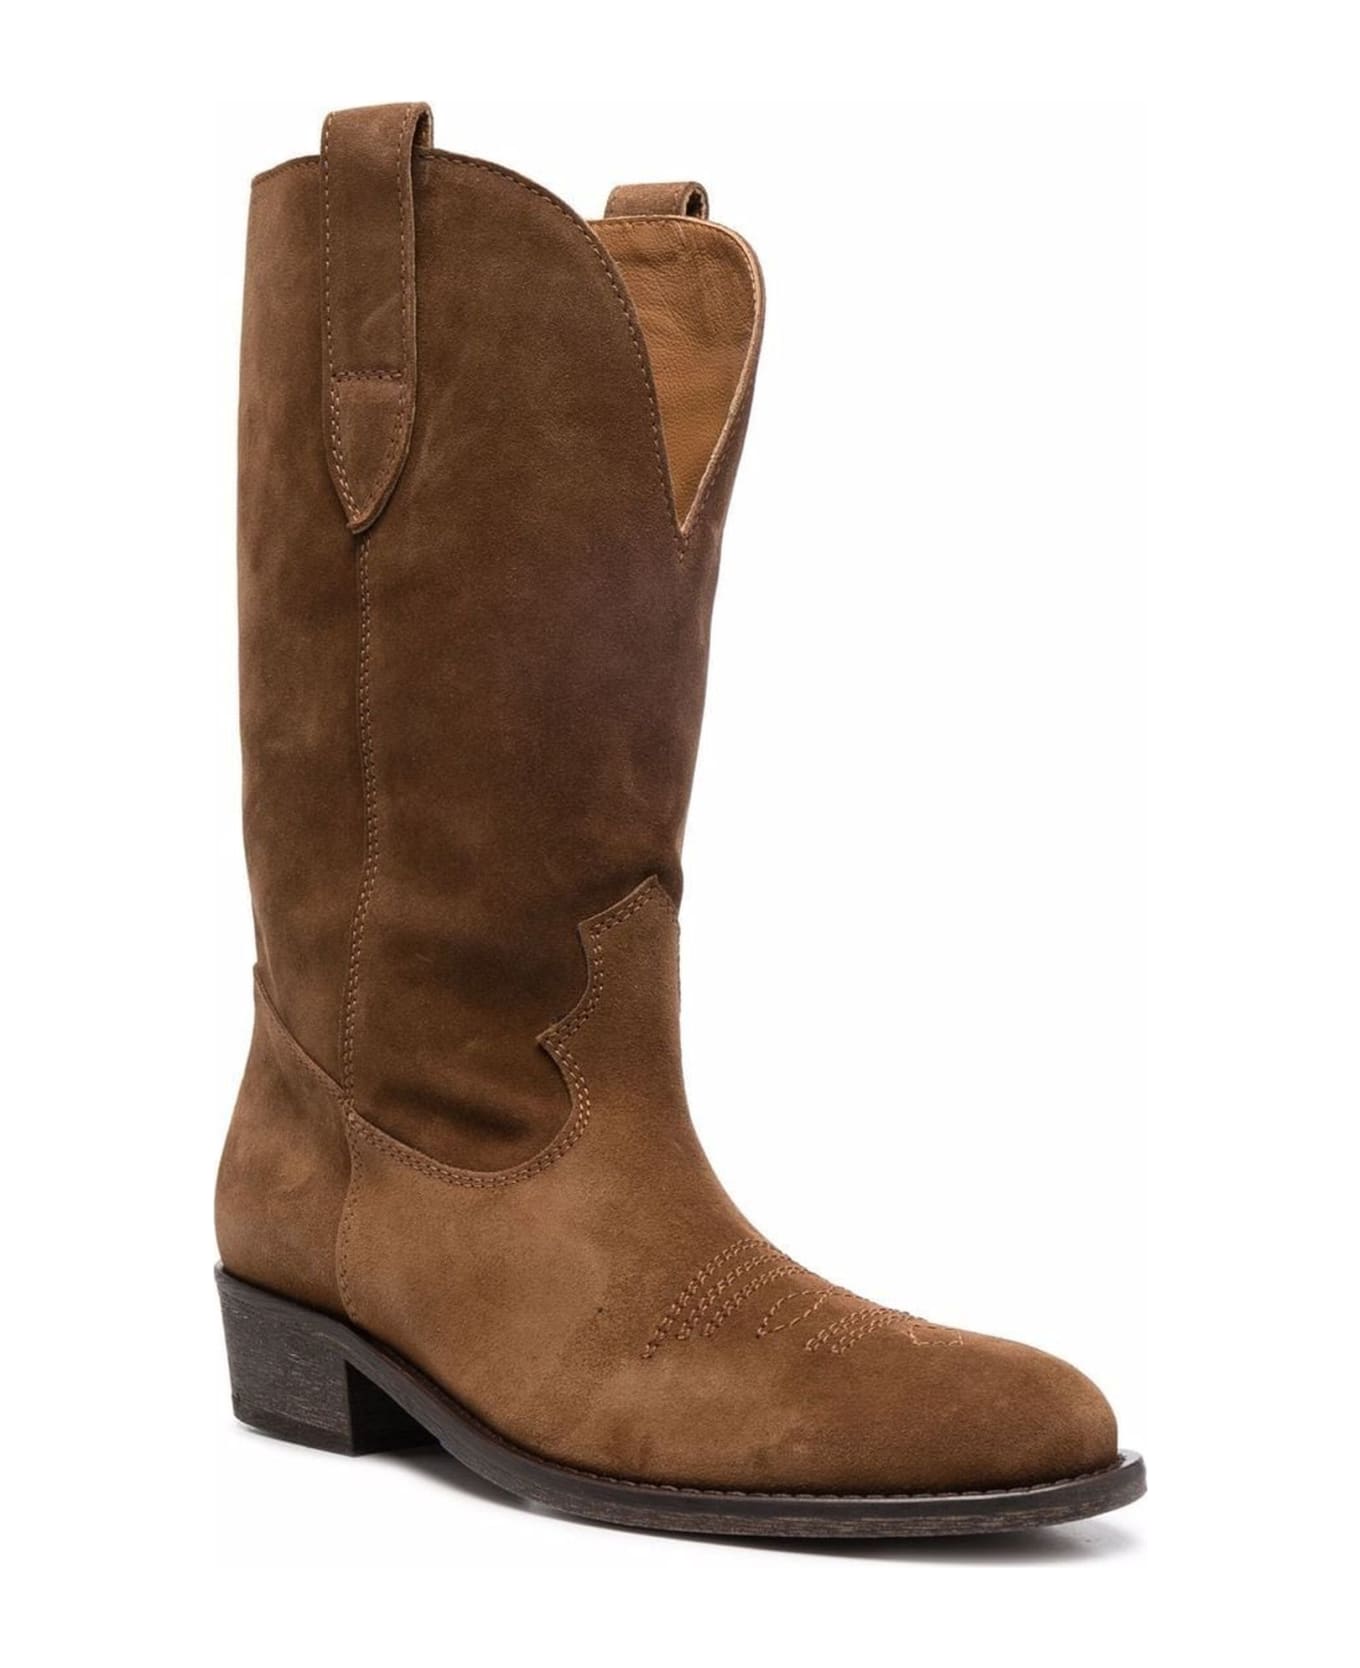 Via Roma 15 Brown Suede Cowboy Boots - Brown ブーツ